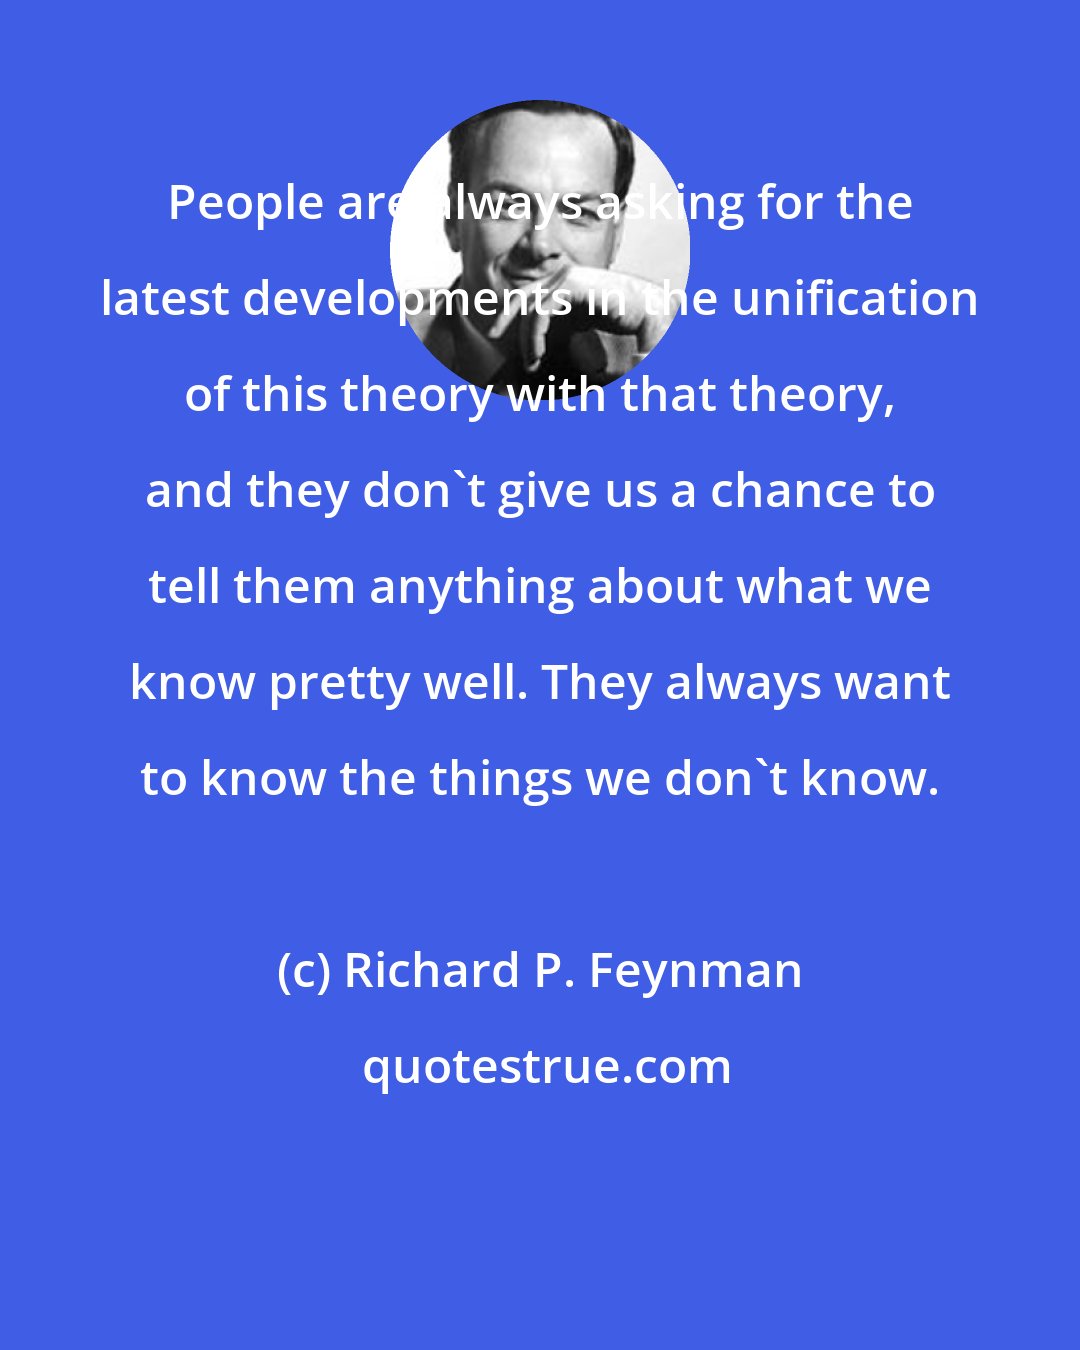 Richard P. Feynman: People are always asking for the latest developments in the unification of this theory with that theory, and they don't give us a chance to tell them anything about what we know pretty well. They always want to know the things we don't know.